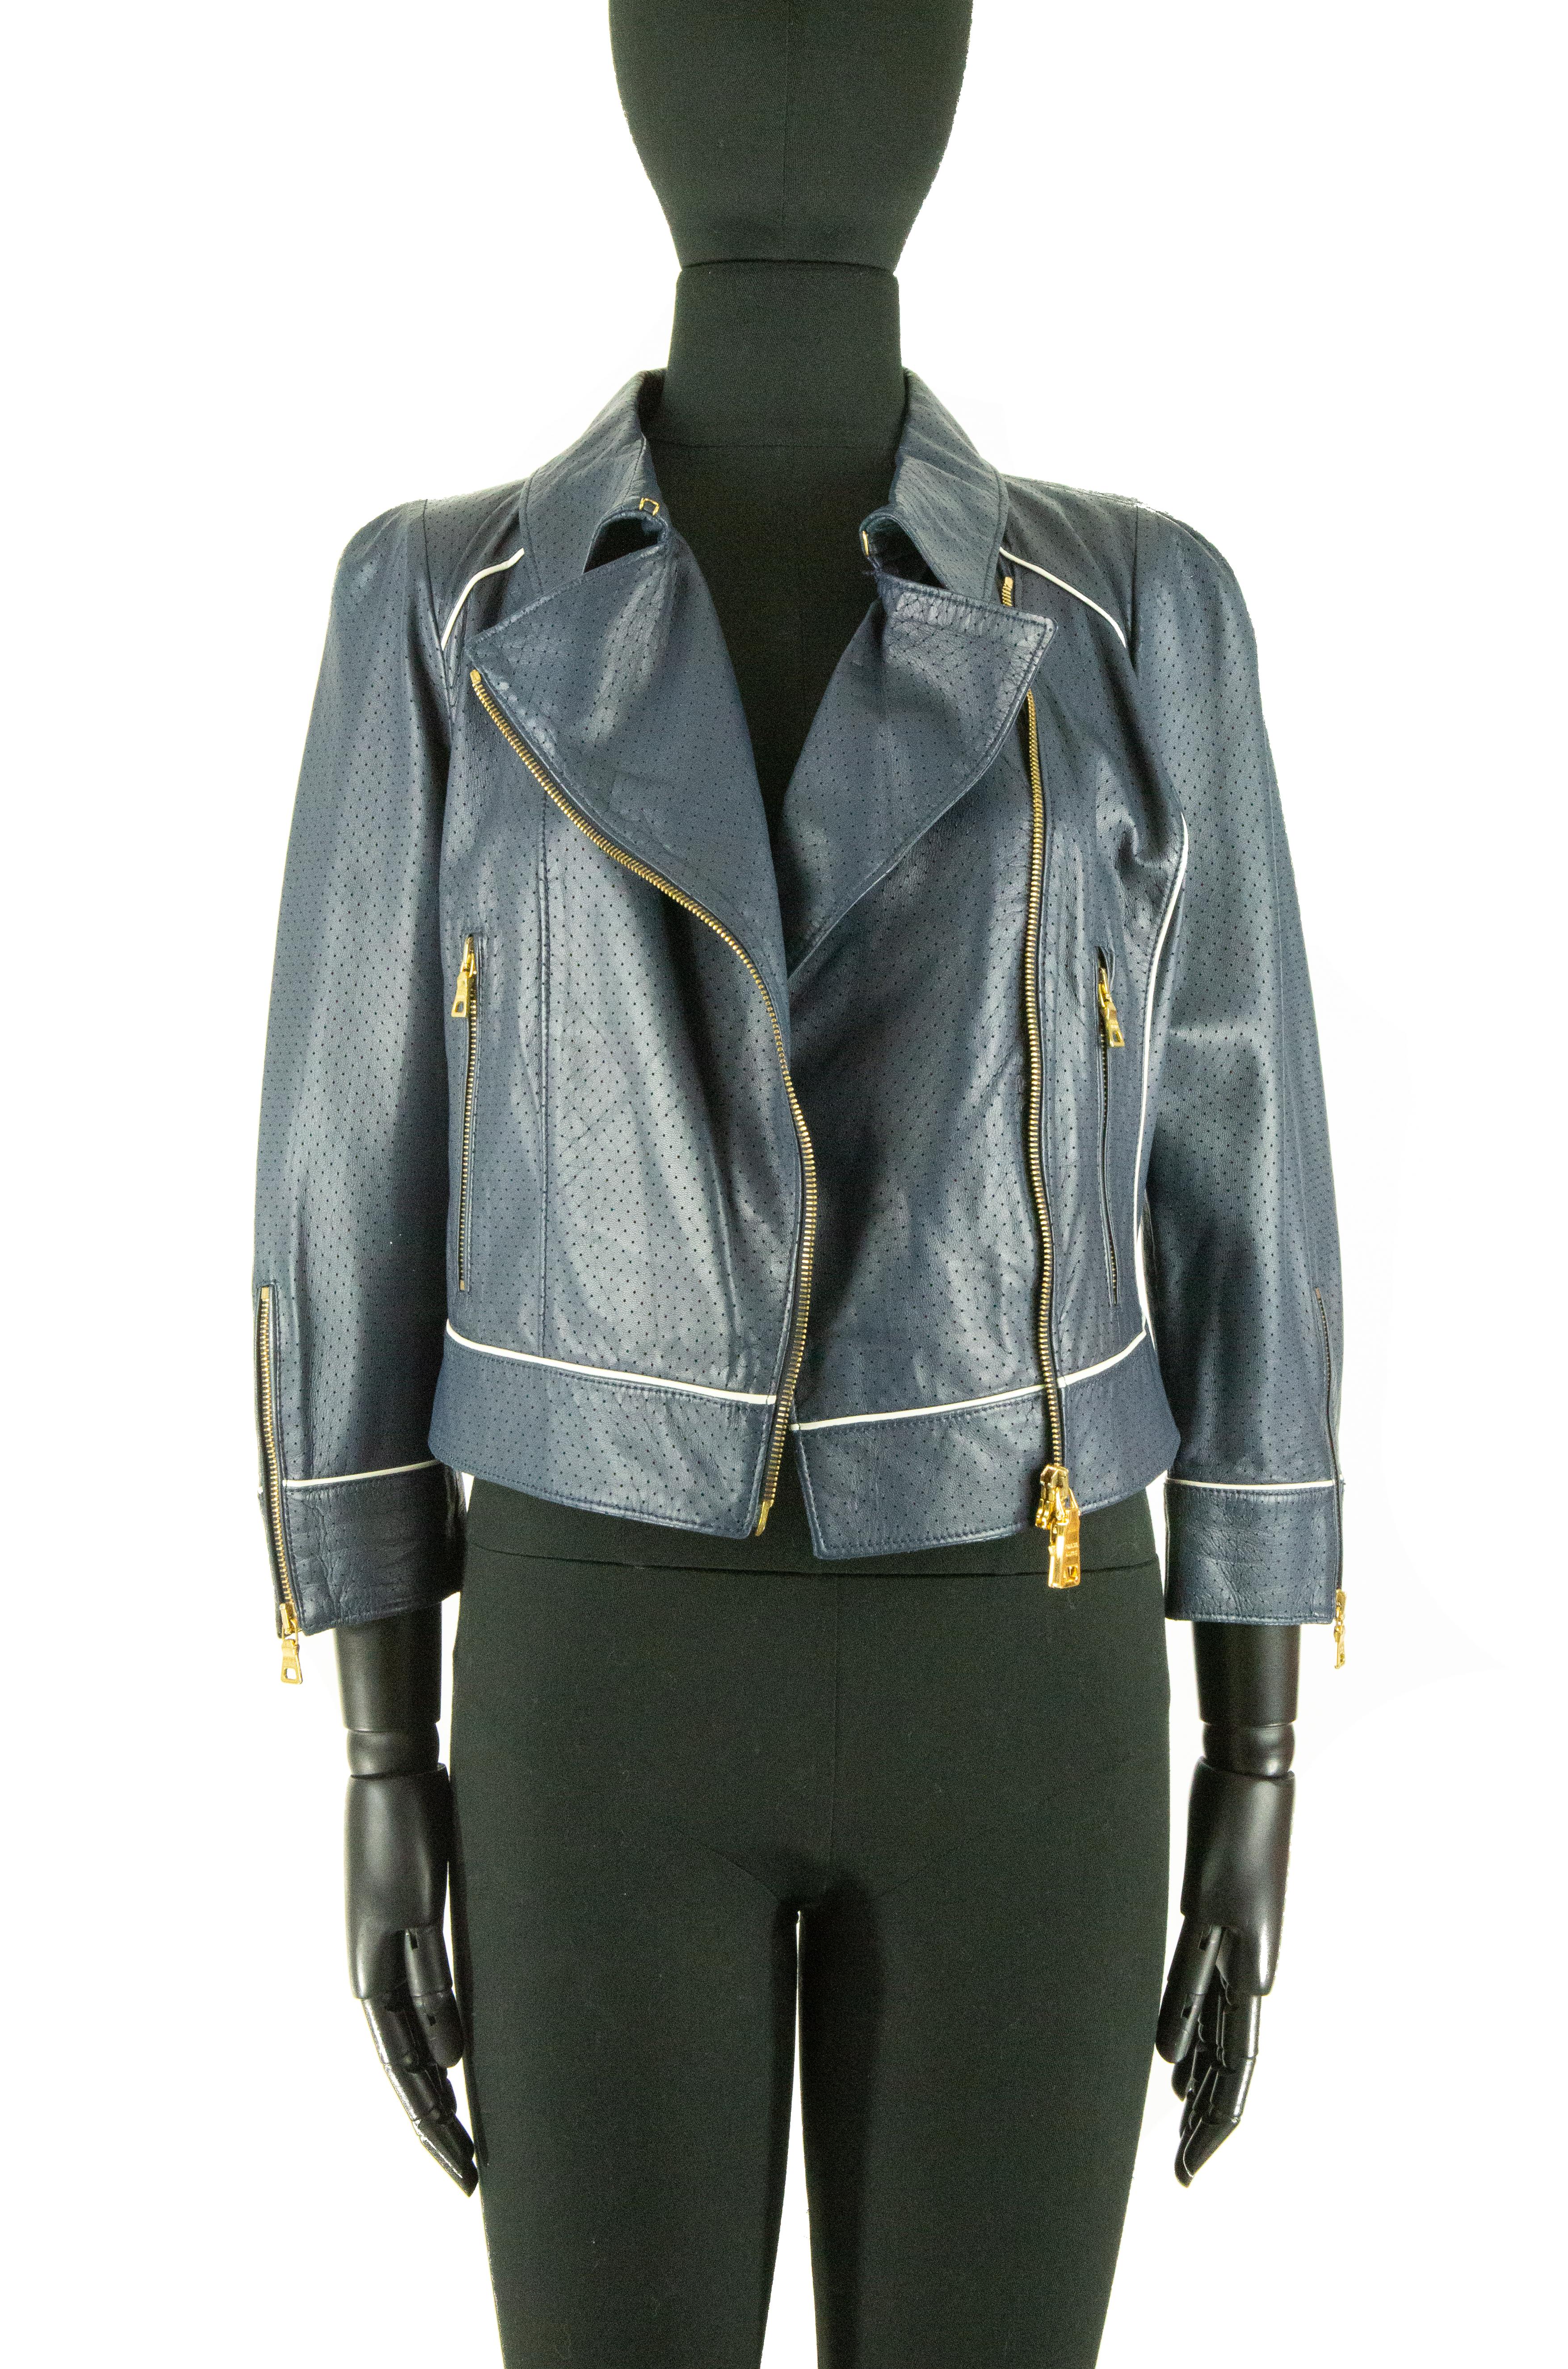 A navy Prada cropped leather jacket. This jacket features gold-coloured zippers; the main zipper working its way asymmetrically from the left shoulder down to the hem of the jacket. It has four more zippers; two on the pockets at the front, the